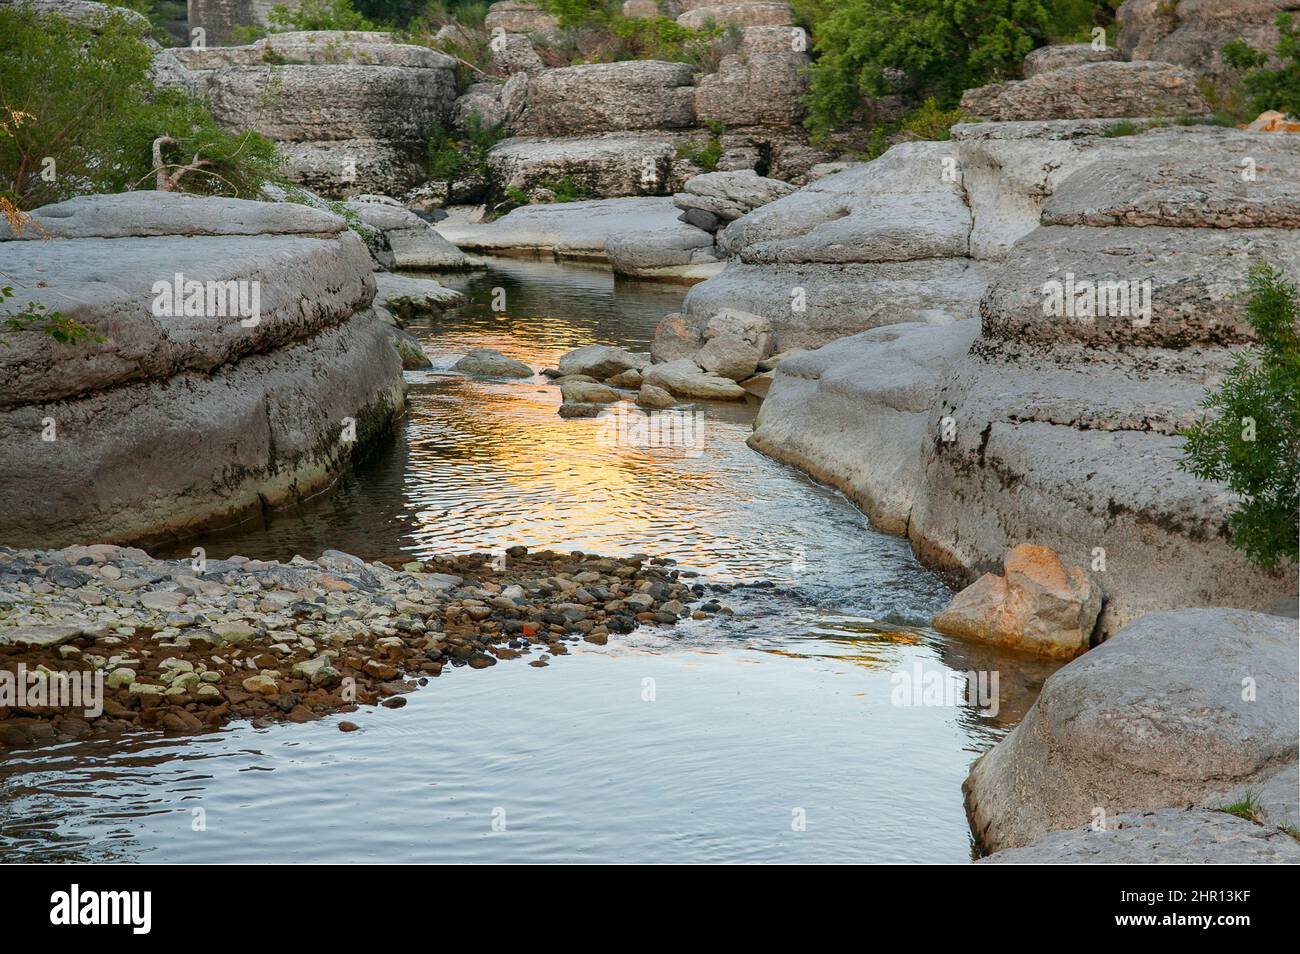 The Auzon at Voguë, mid-mountain stream in spring, Ardeche, France Stock Photo